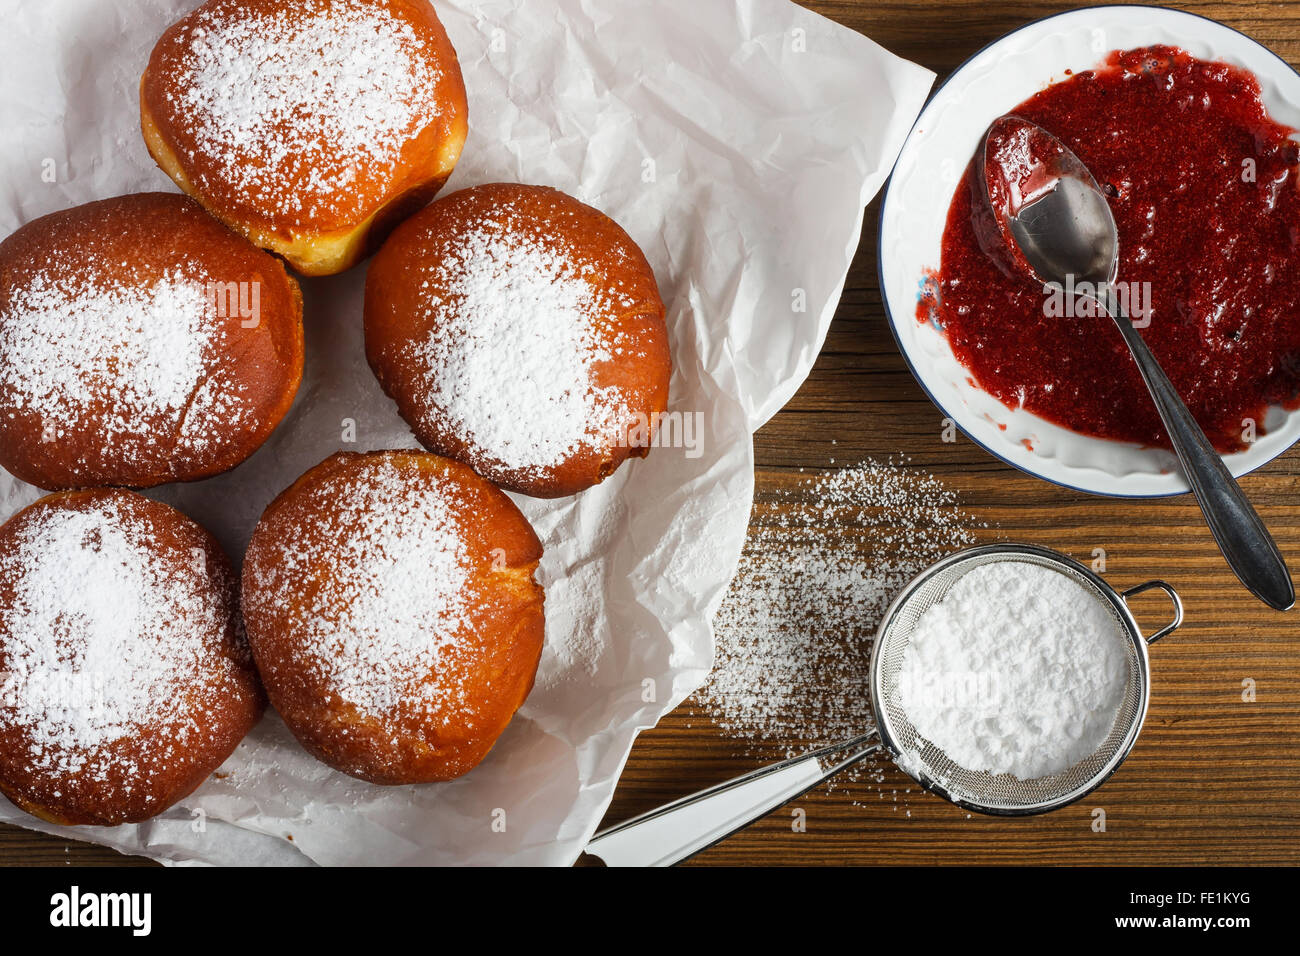 Homemade doughnuts filled with rose marmalade on wooden table. Stock Photo